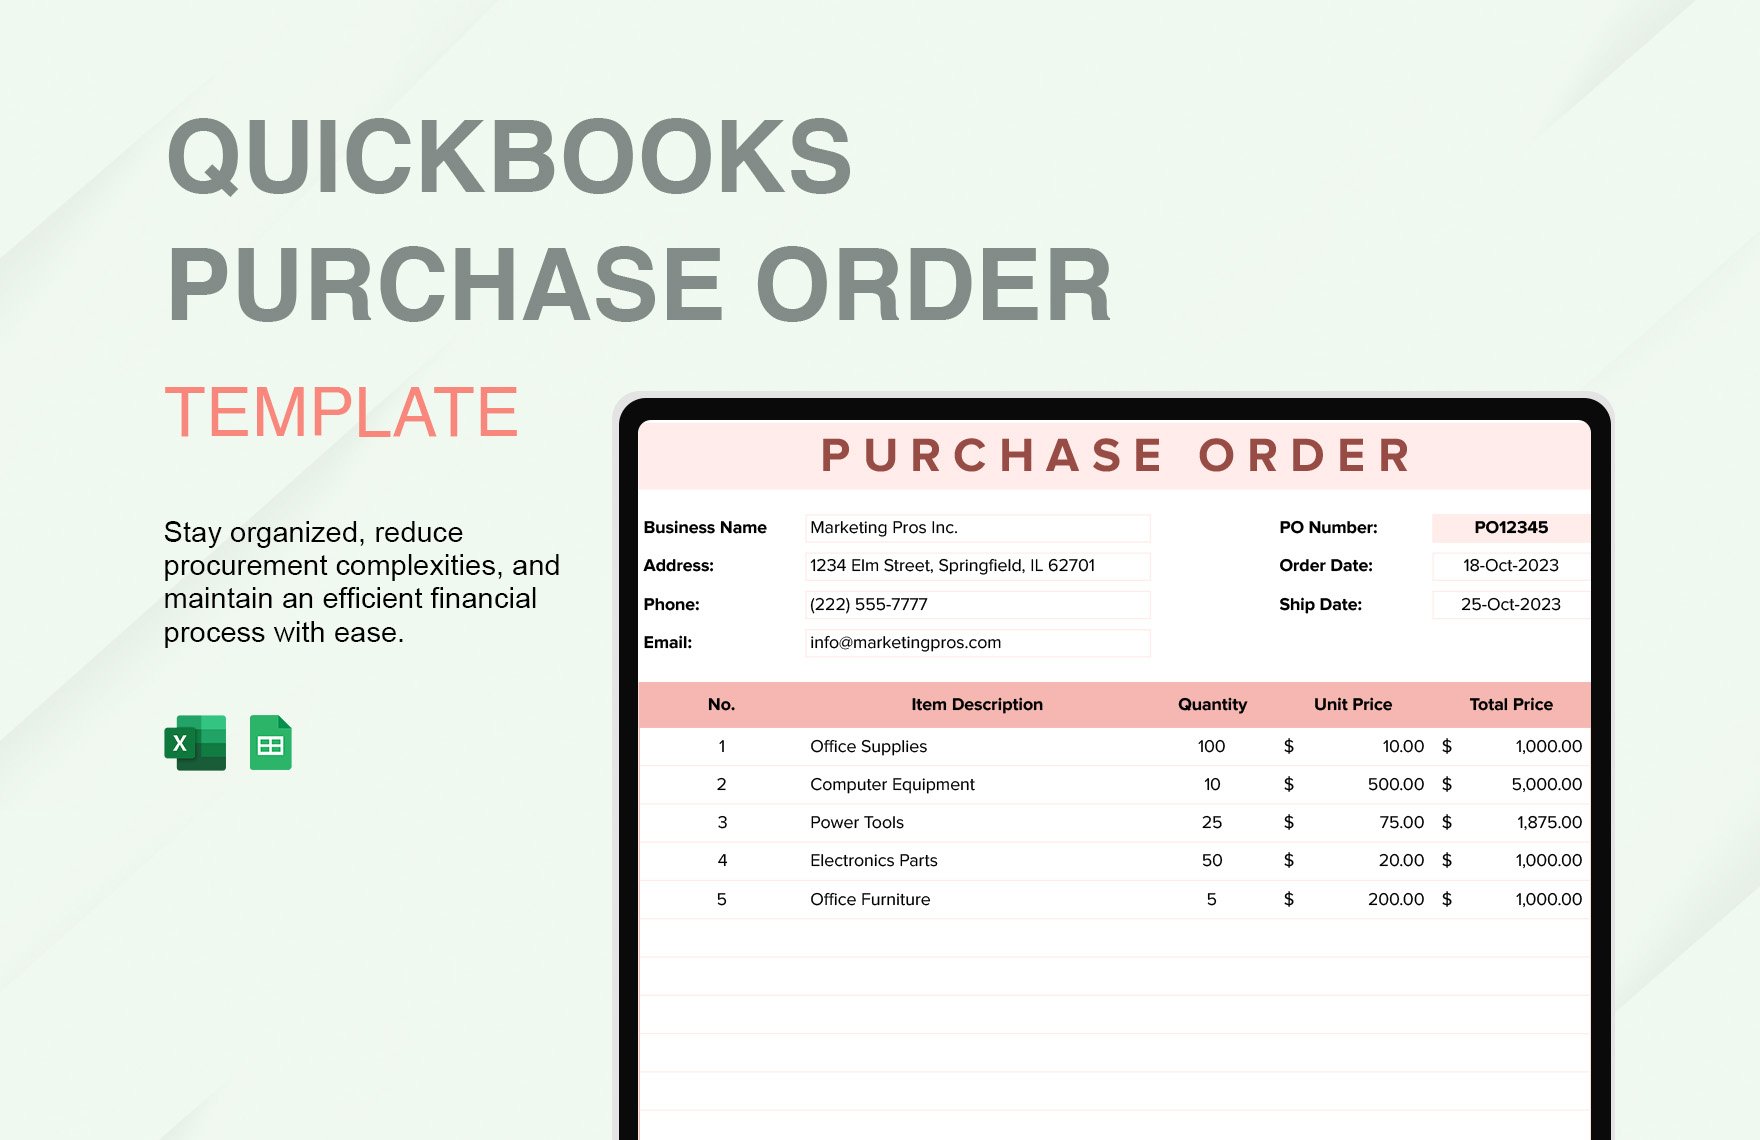 Free Quickbooks Purchase Order Template in Excel, Google Sheets